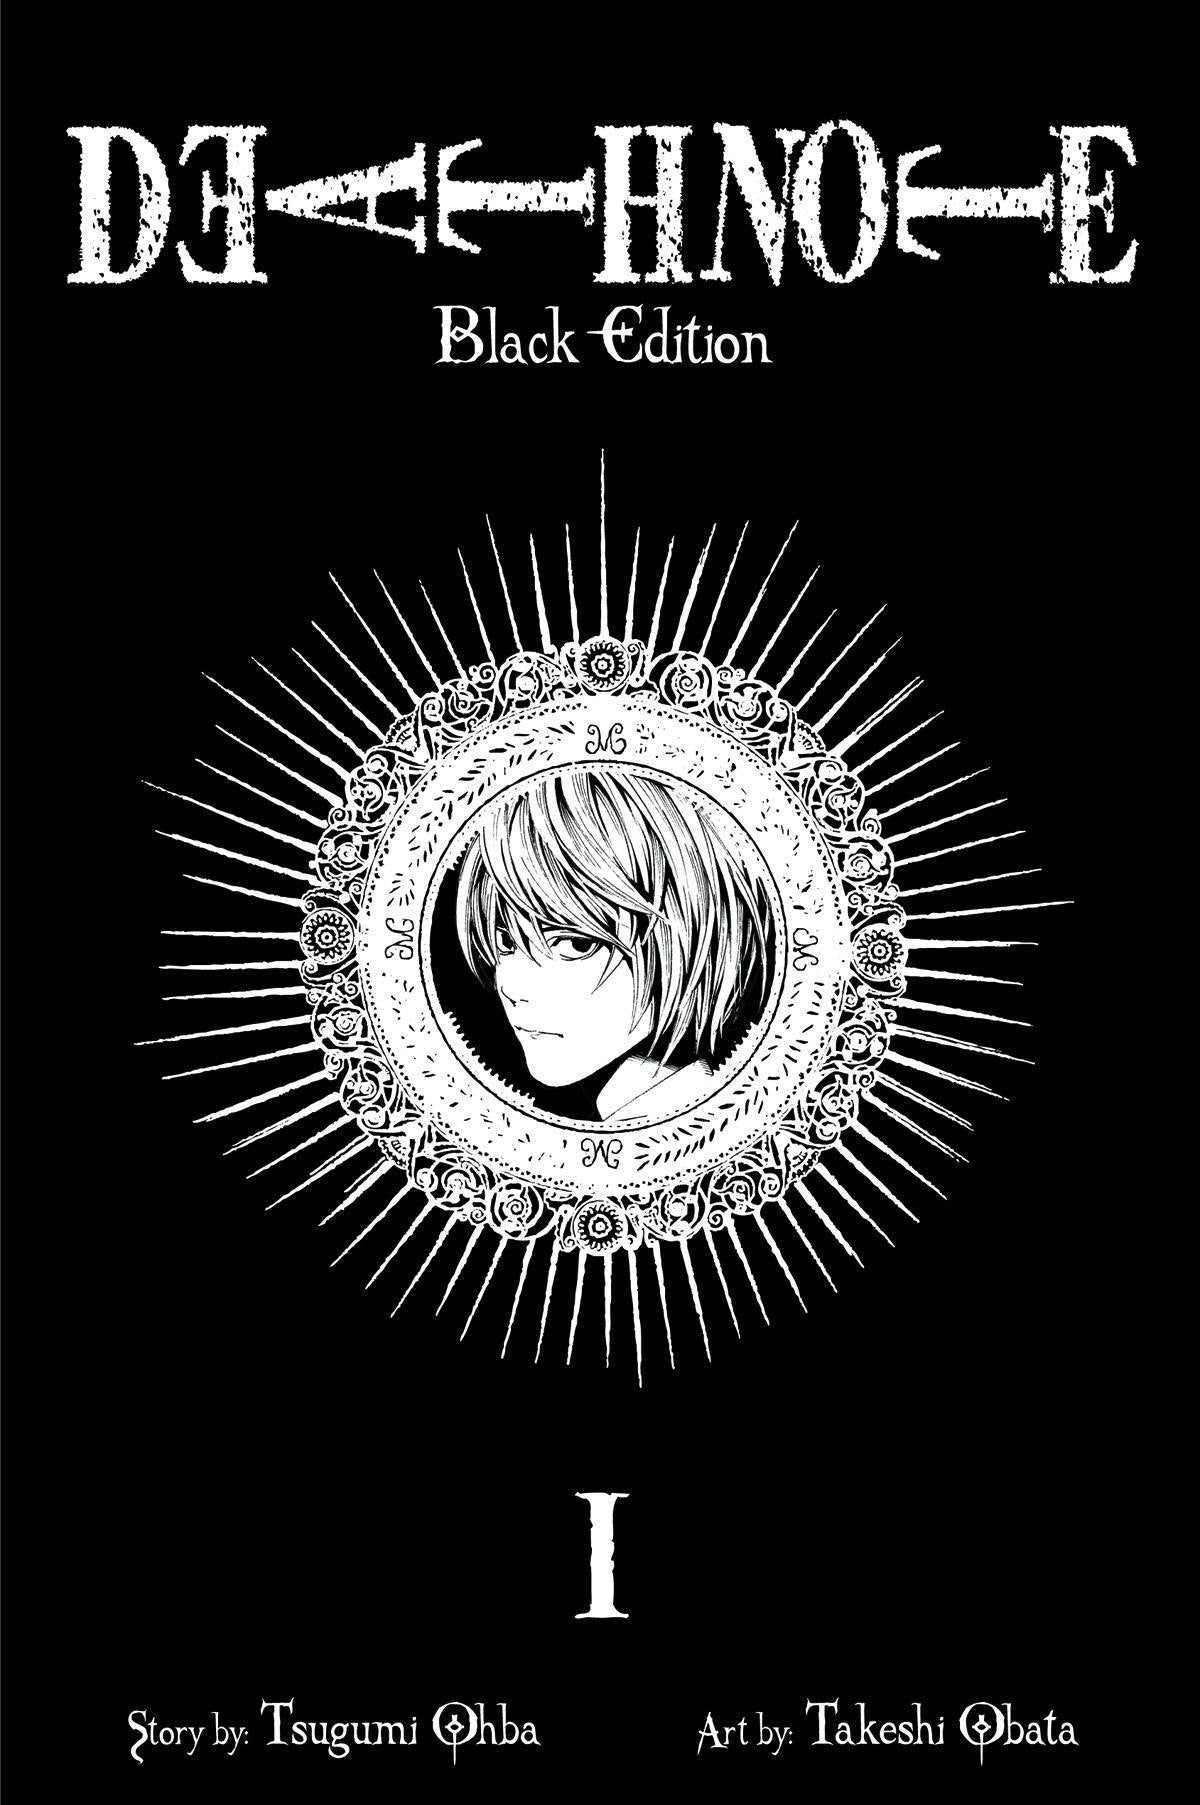 DEATH NOTE BLACK EDITION VOLUME 01 (2 in 1 EDITION)